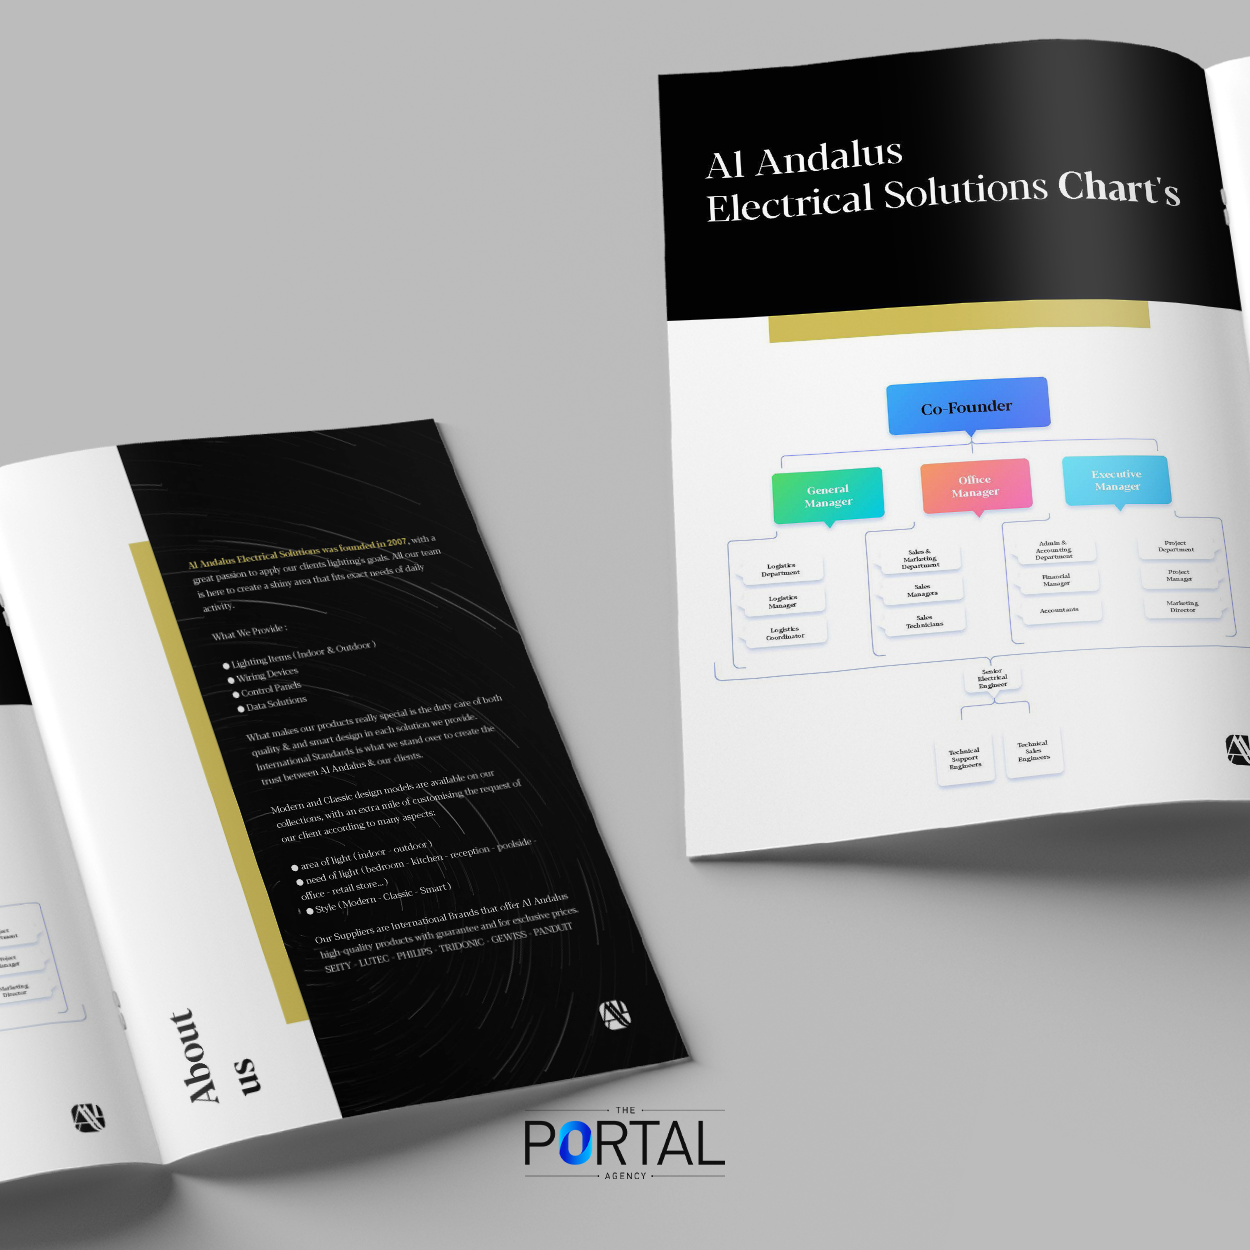 https://theportalagency.com/project/al-andalus-electrical-solutions-branding/